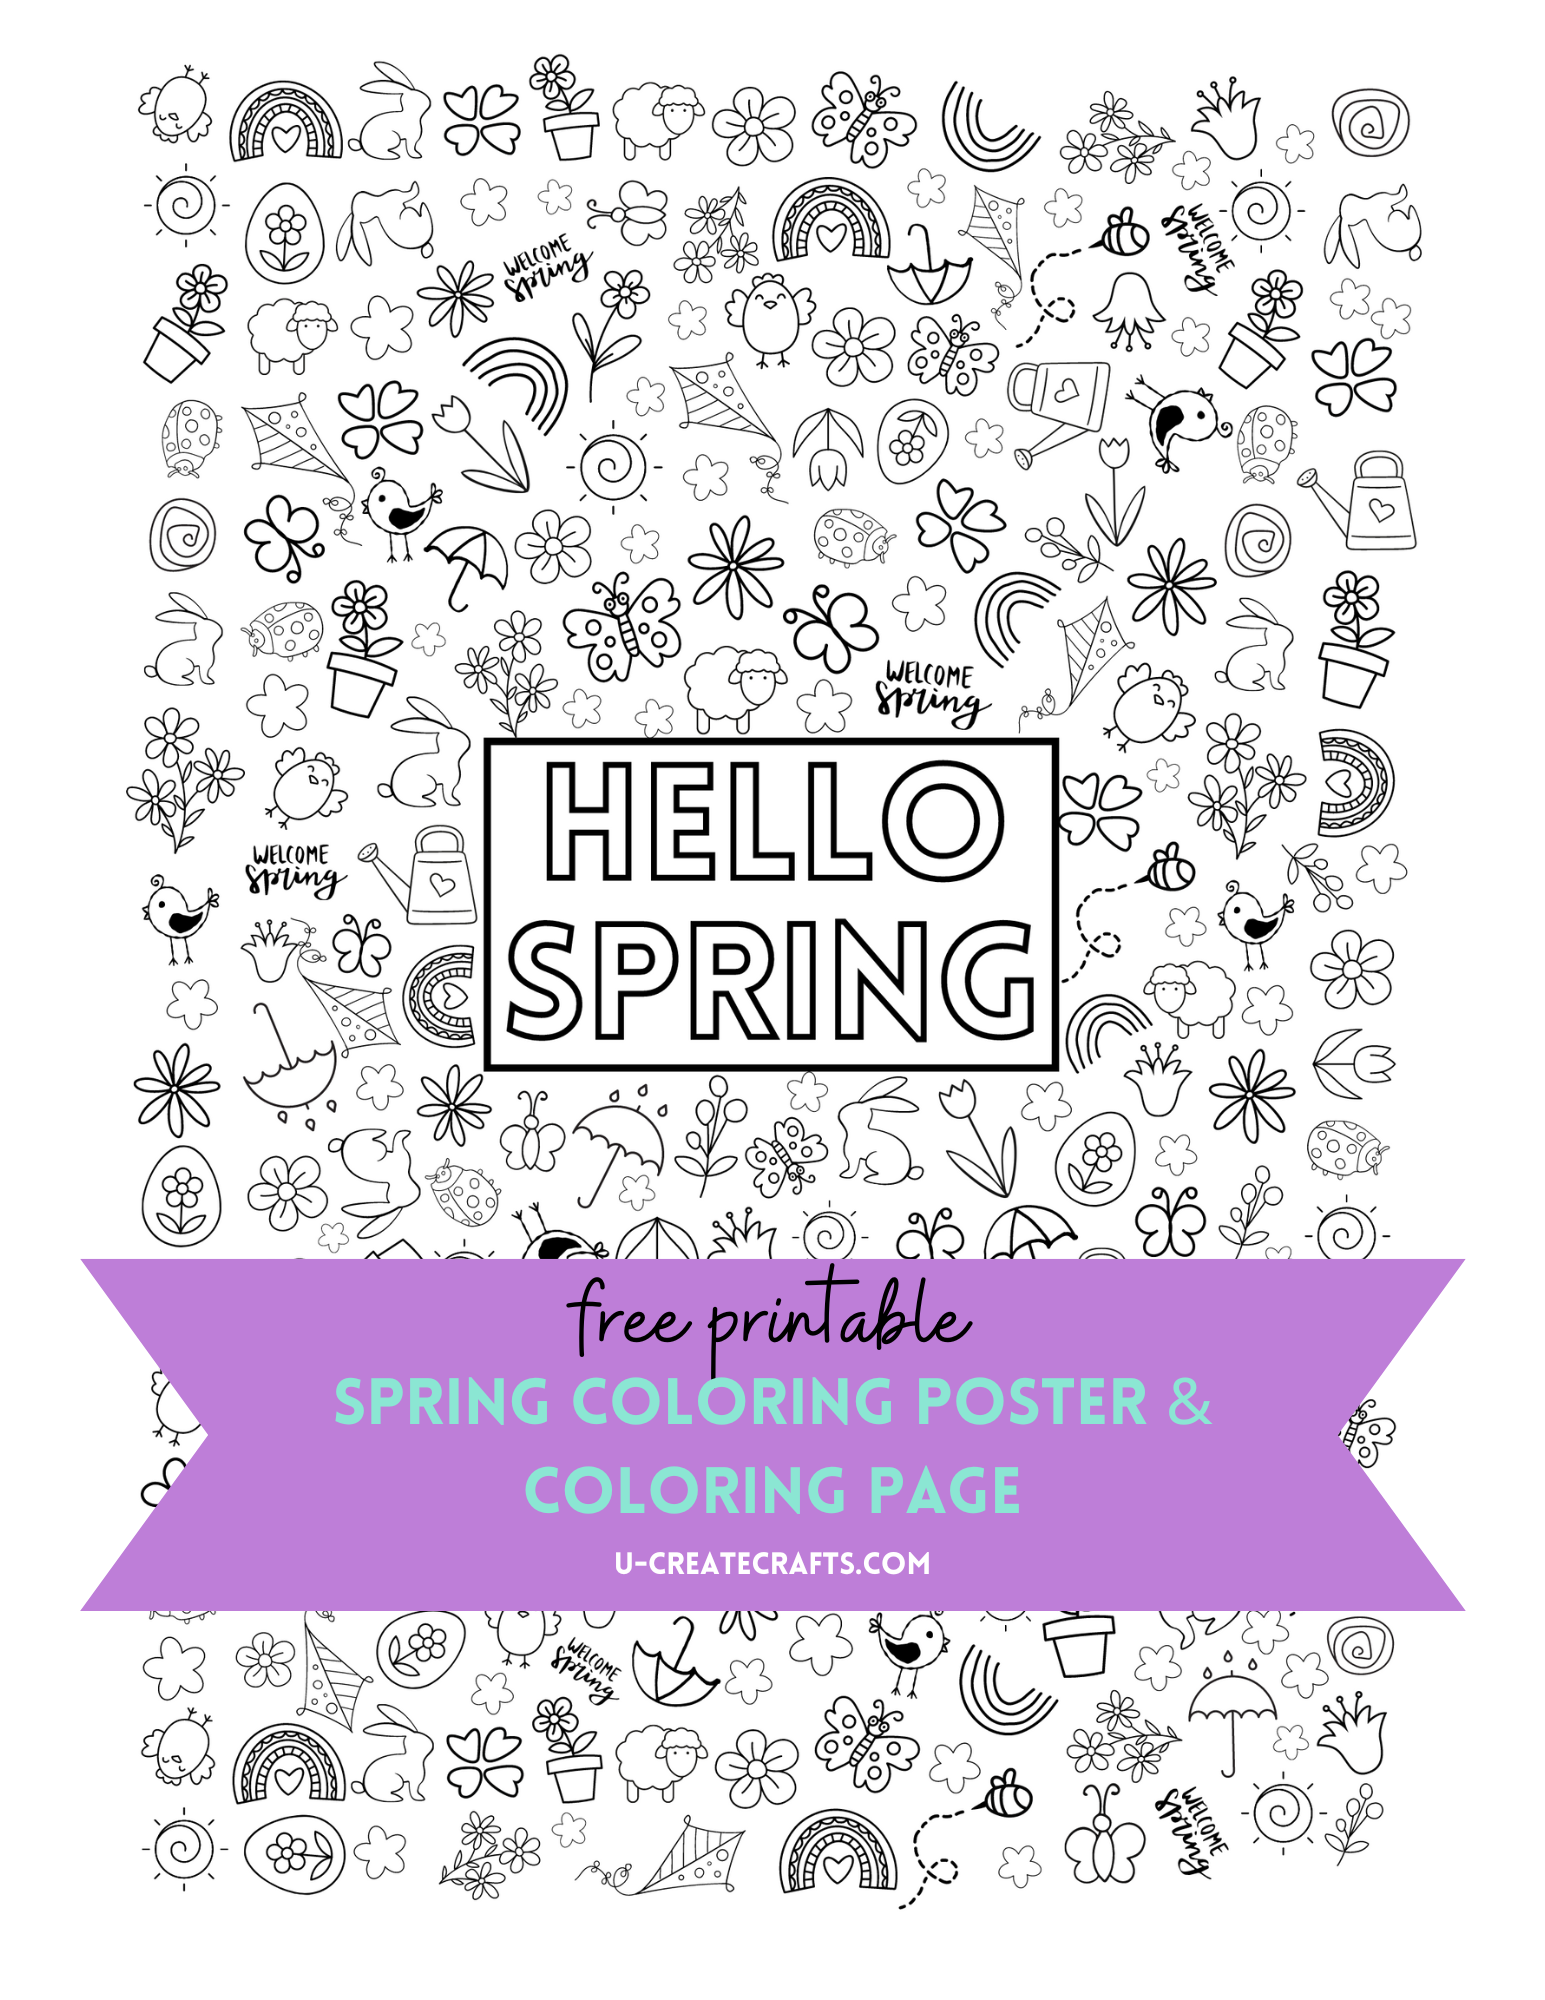 Spring coloring poster and page